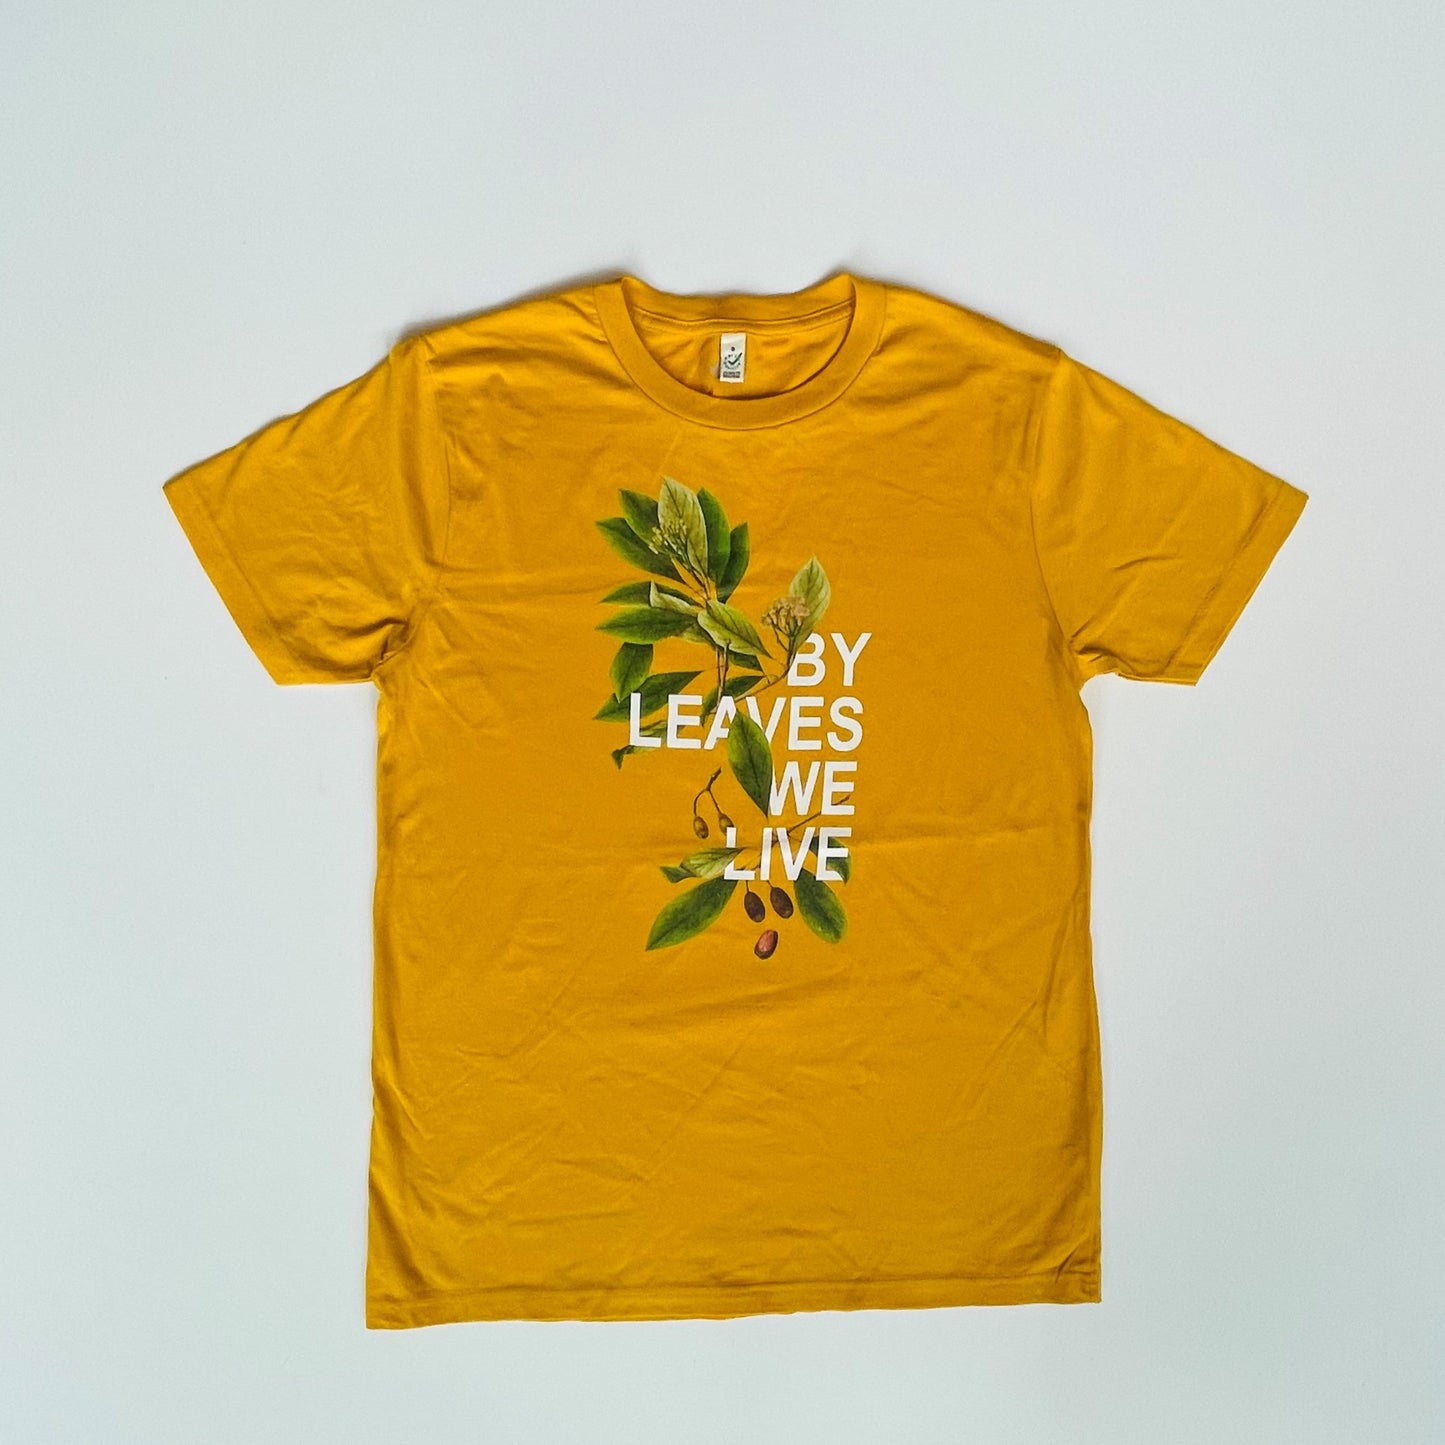 'By Leaves We Live' T-Shirt - Yellow